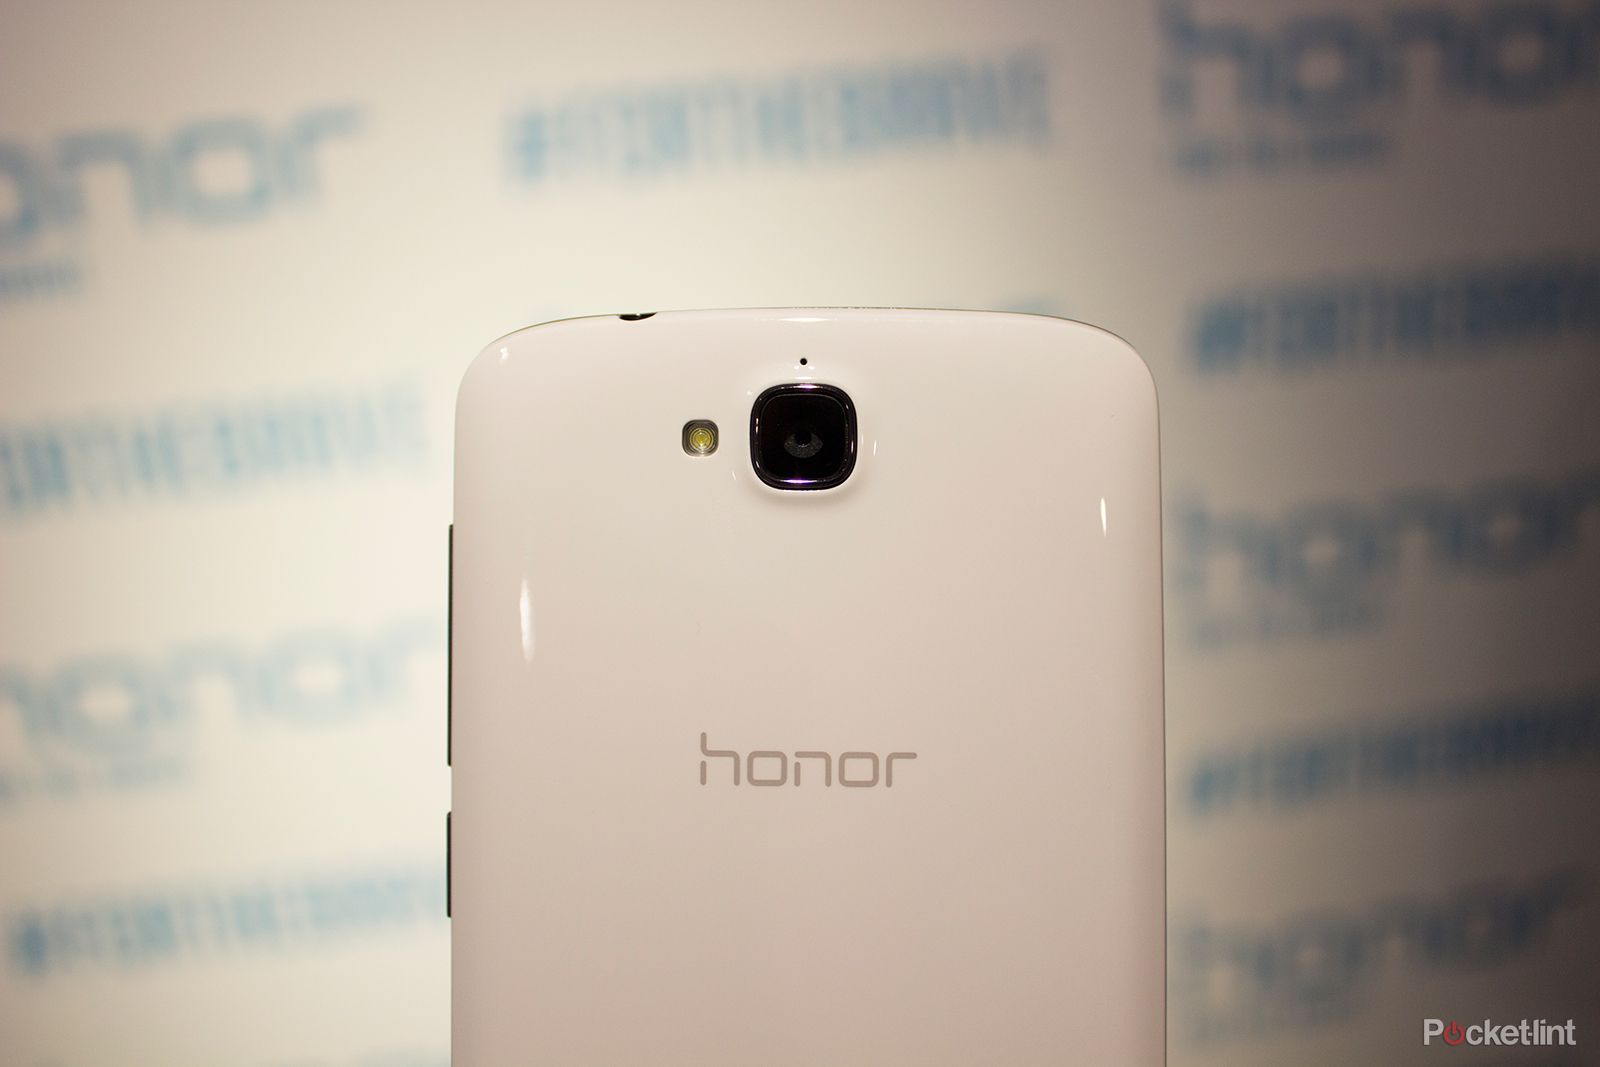 honor holly decent specs for under 100 hands on image 7